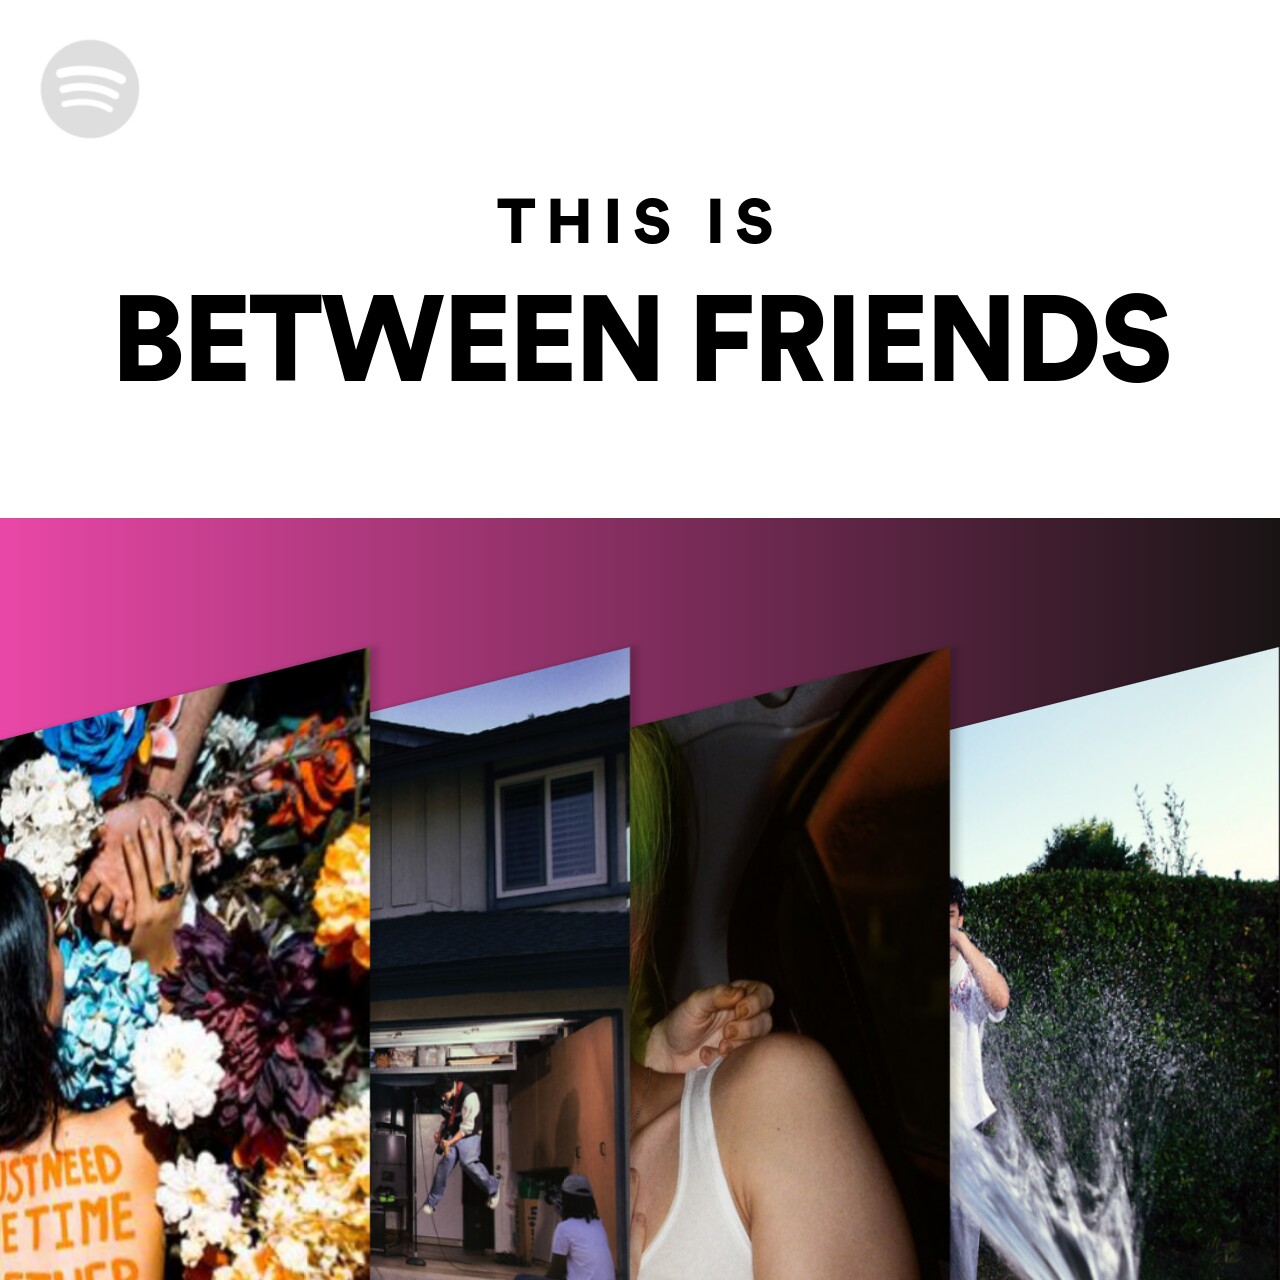 This Is BETWEEN FRIENDS